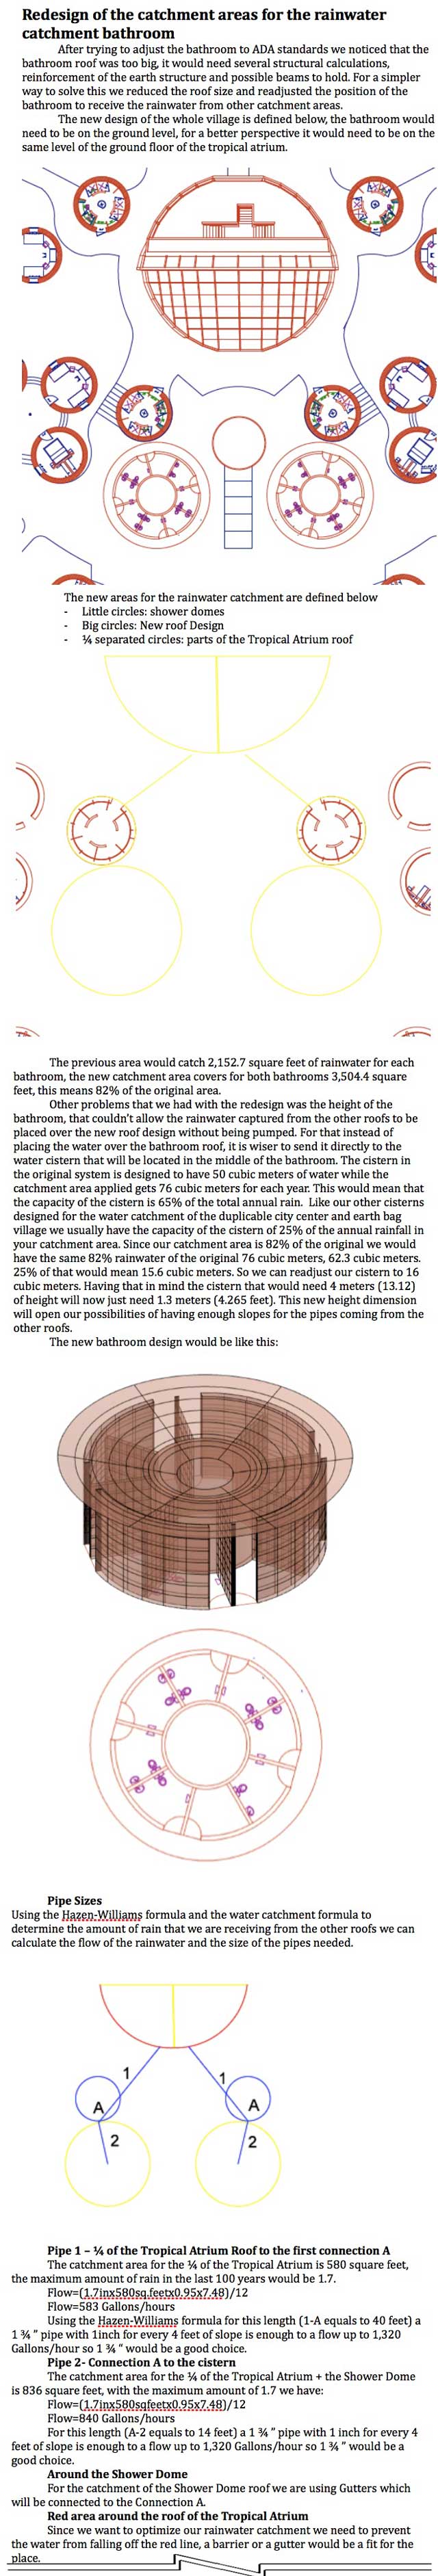  water catchment net-zero toilet domes redesign, One Community